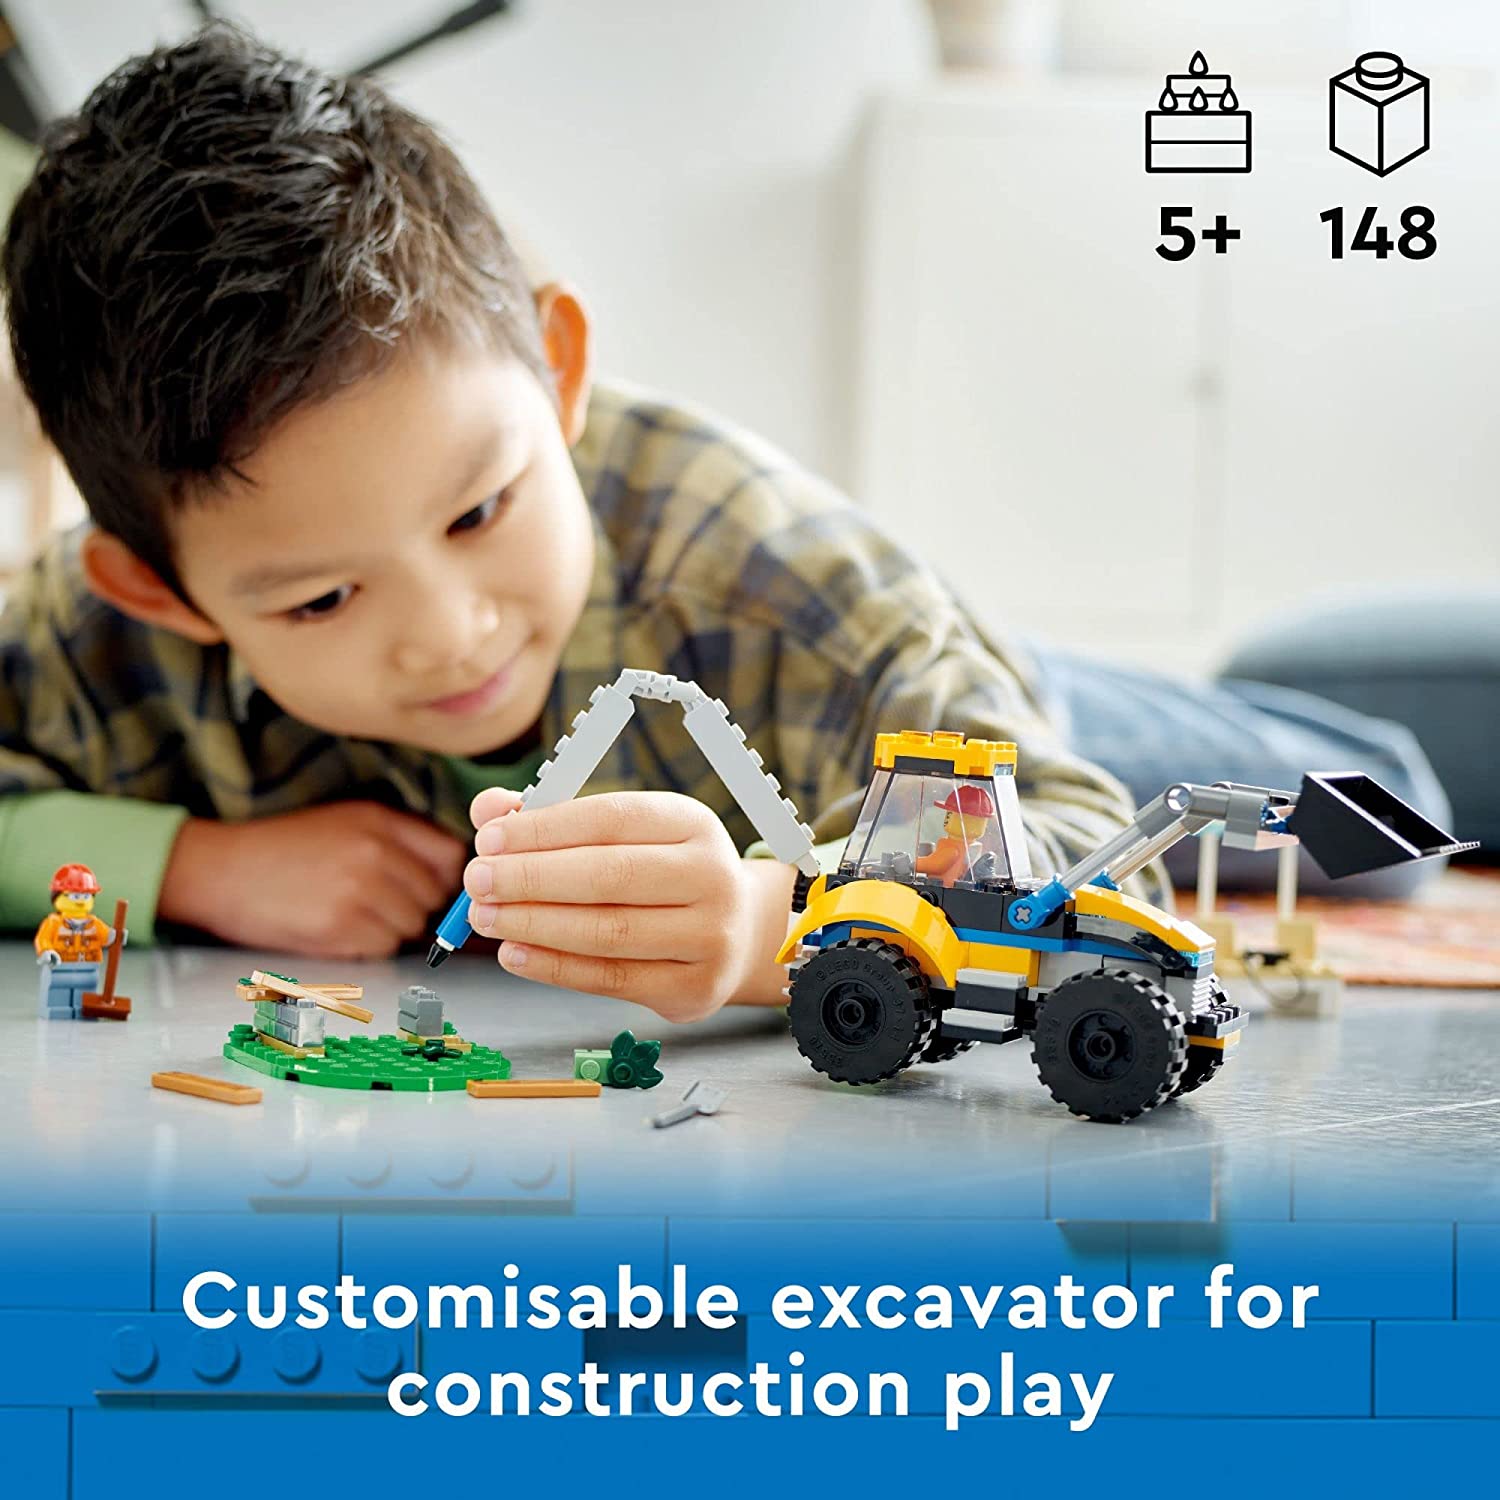 LEGO City Construction Digger Excavator Building Kit For Ages 5+